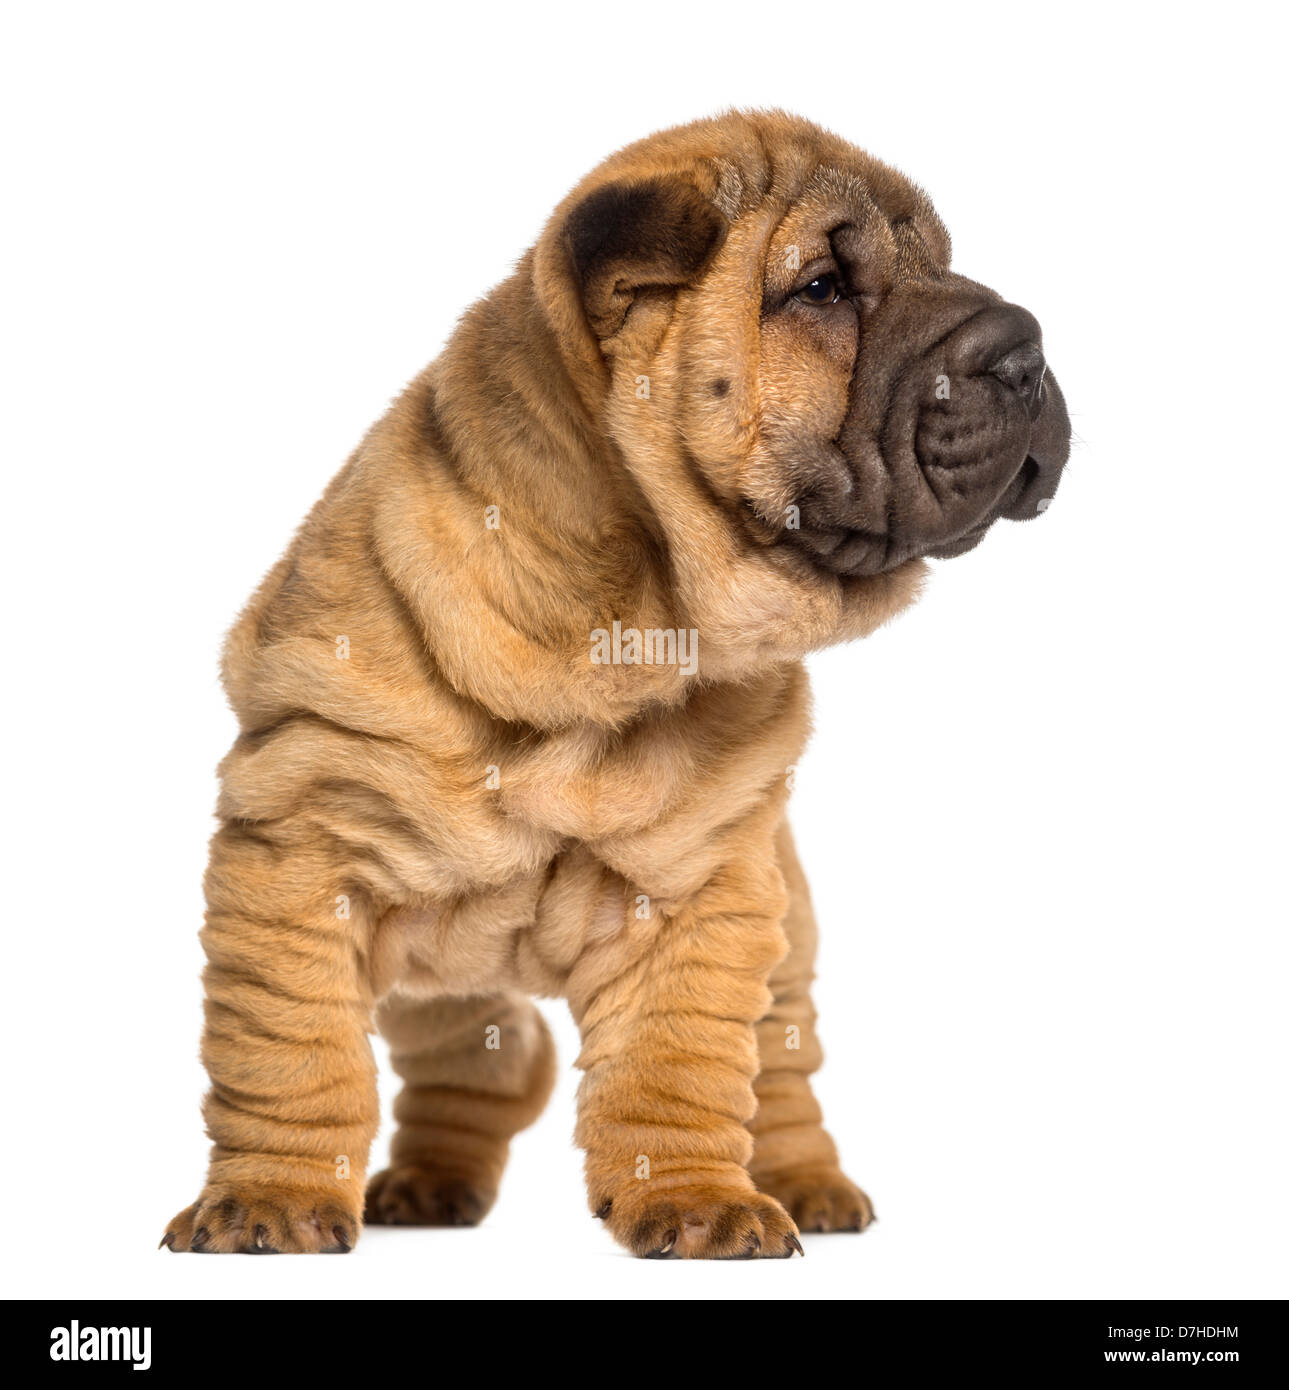 Shar Pei puppy, 2 months old, standing against white background Stock Photo